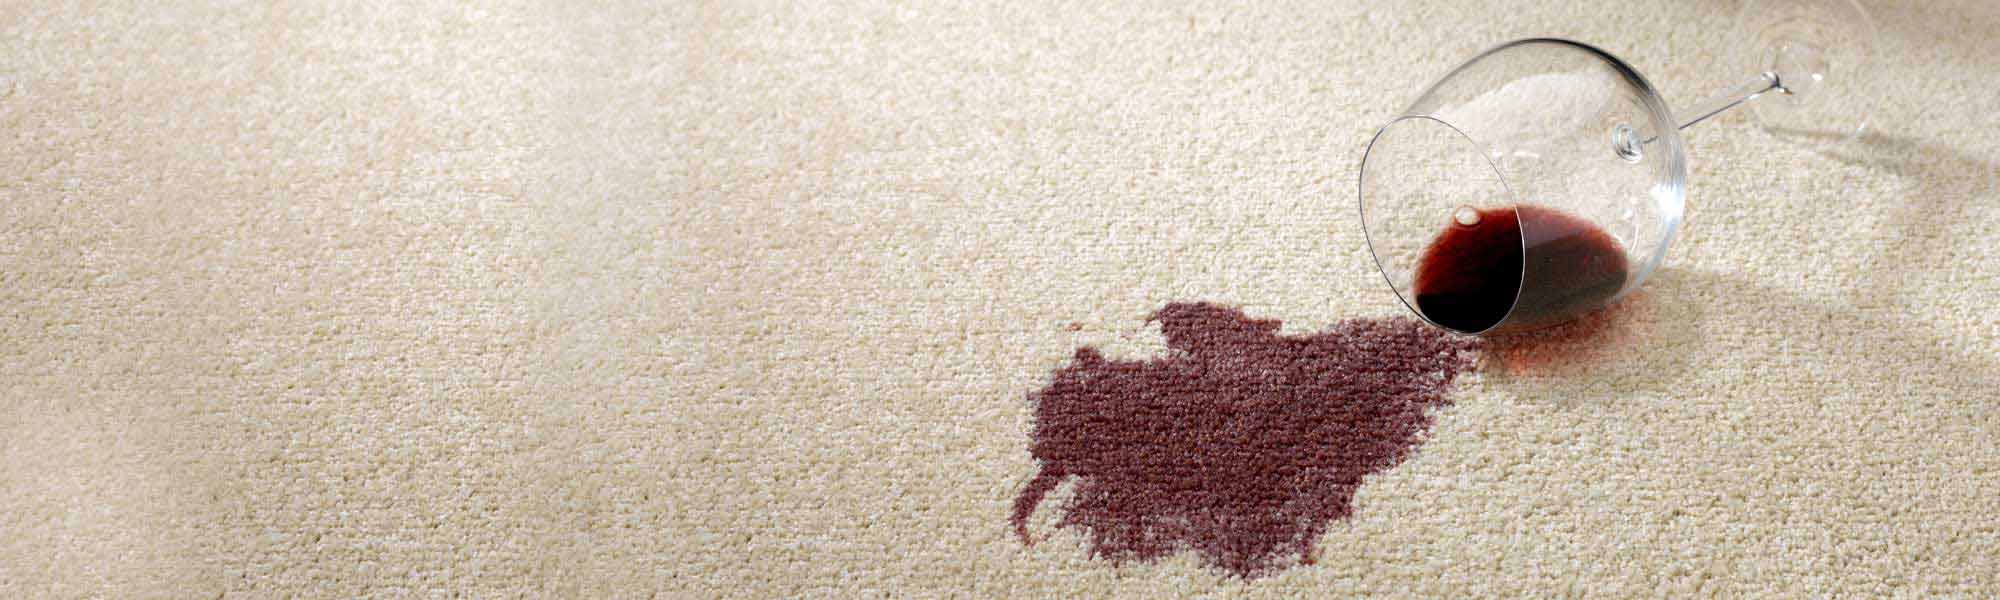 Professional Stain Removal Service by Chem-Dry of Savannah